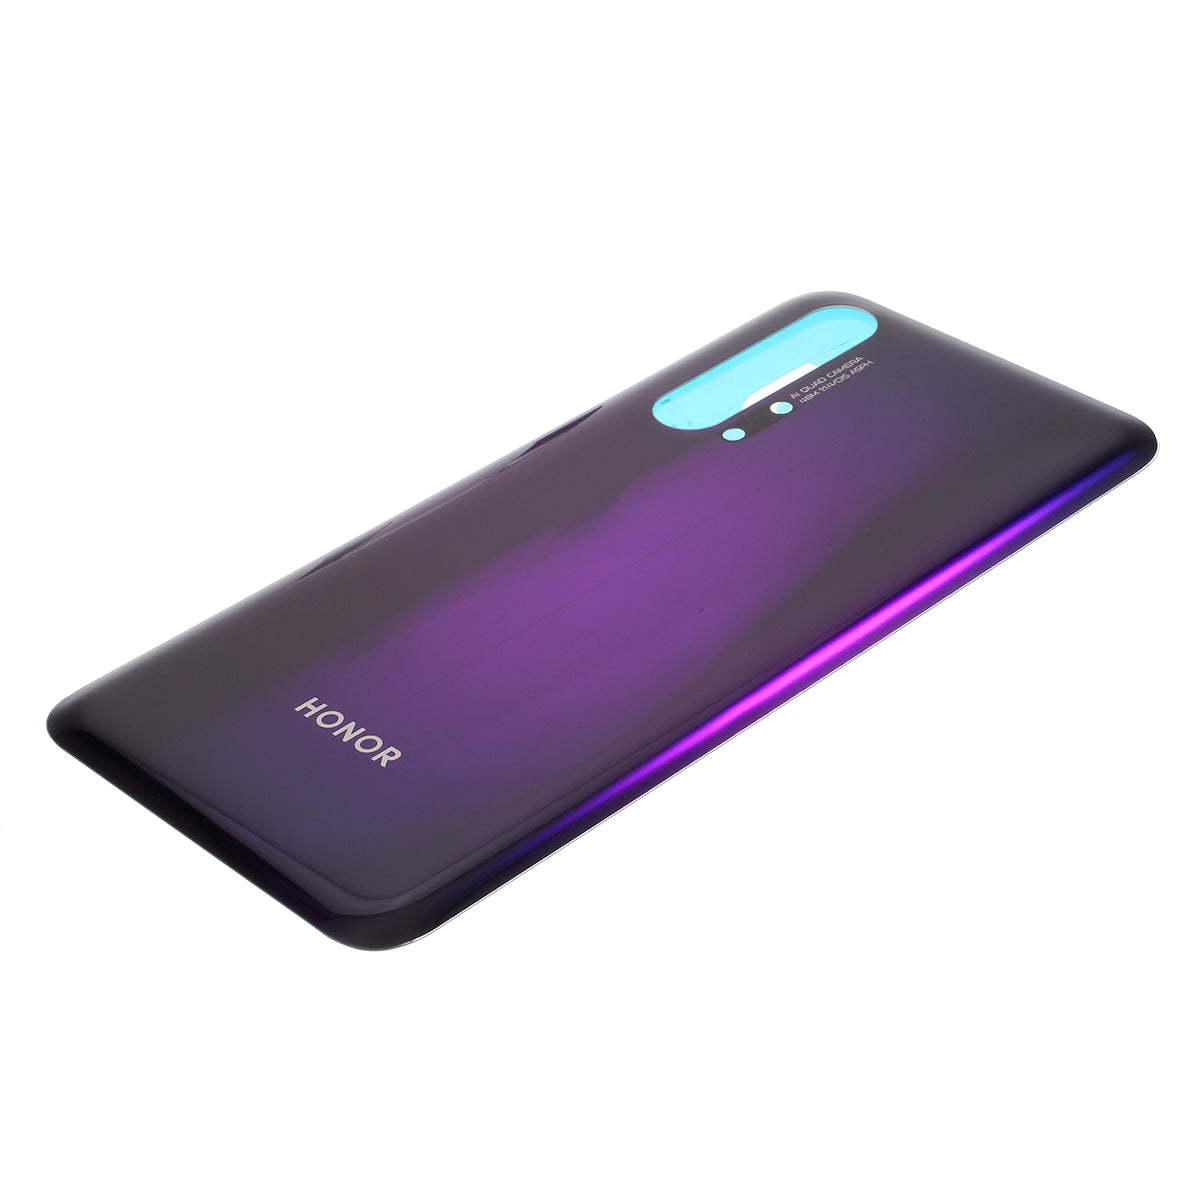 OEM Battery Housing with Adhesive Sticker for Honor 20 Pro YAL-AL10 - Purple